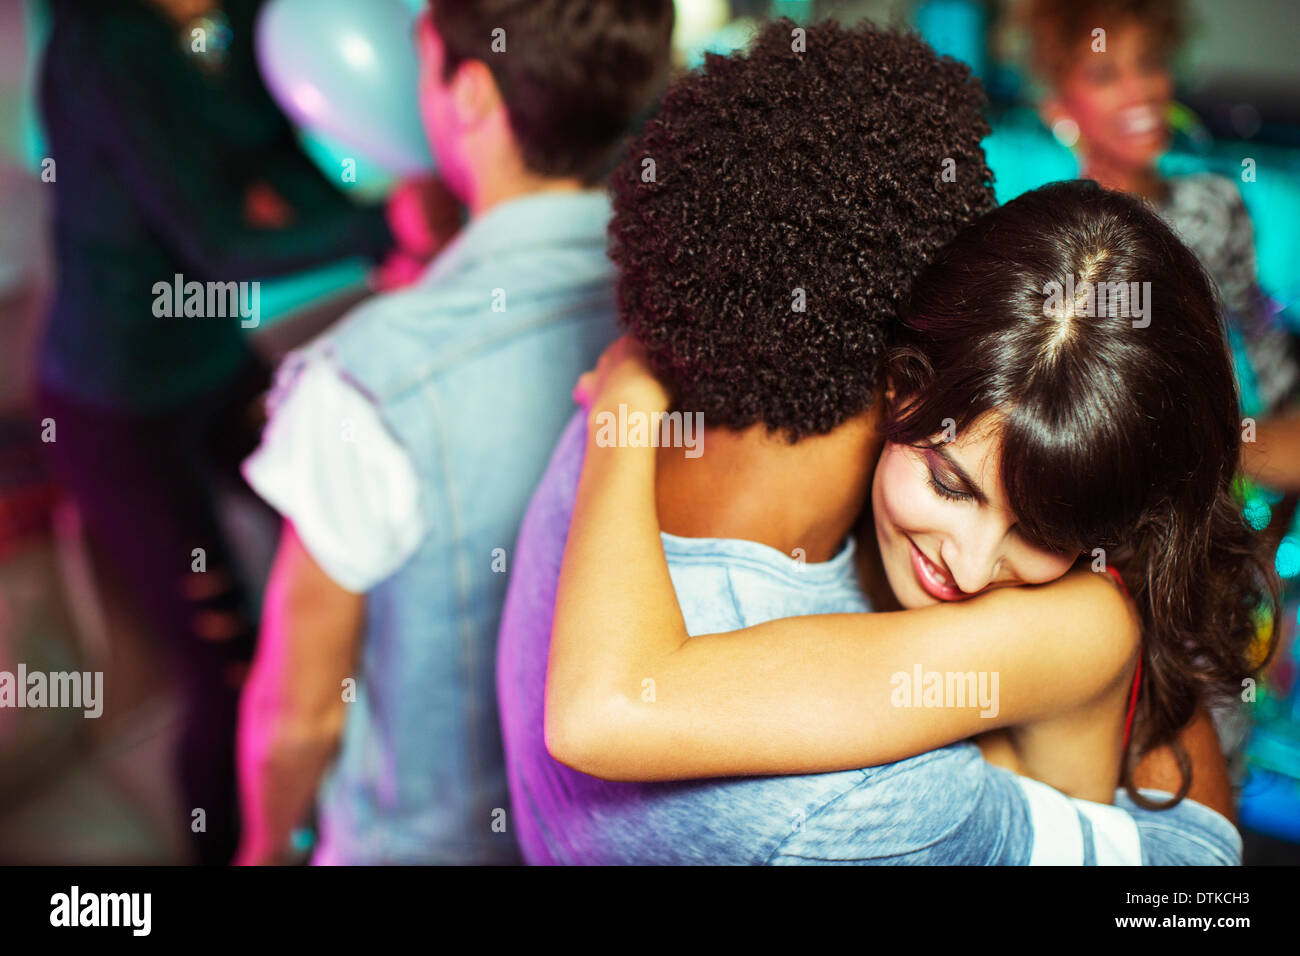 Couple dancing at party Banque D'Images